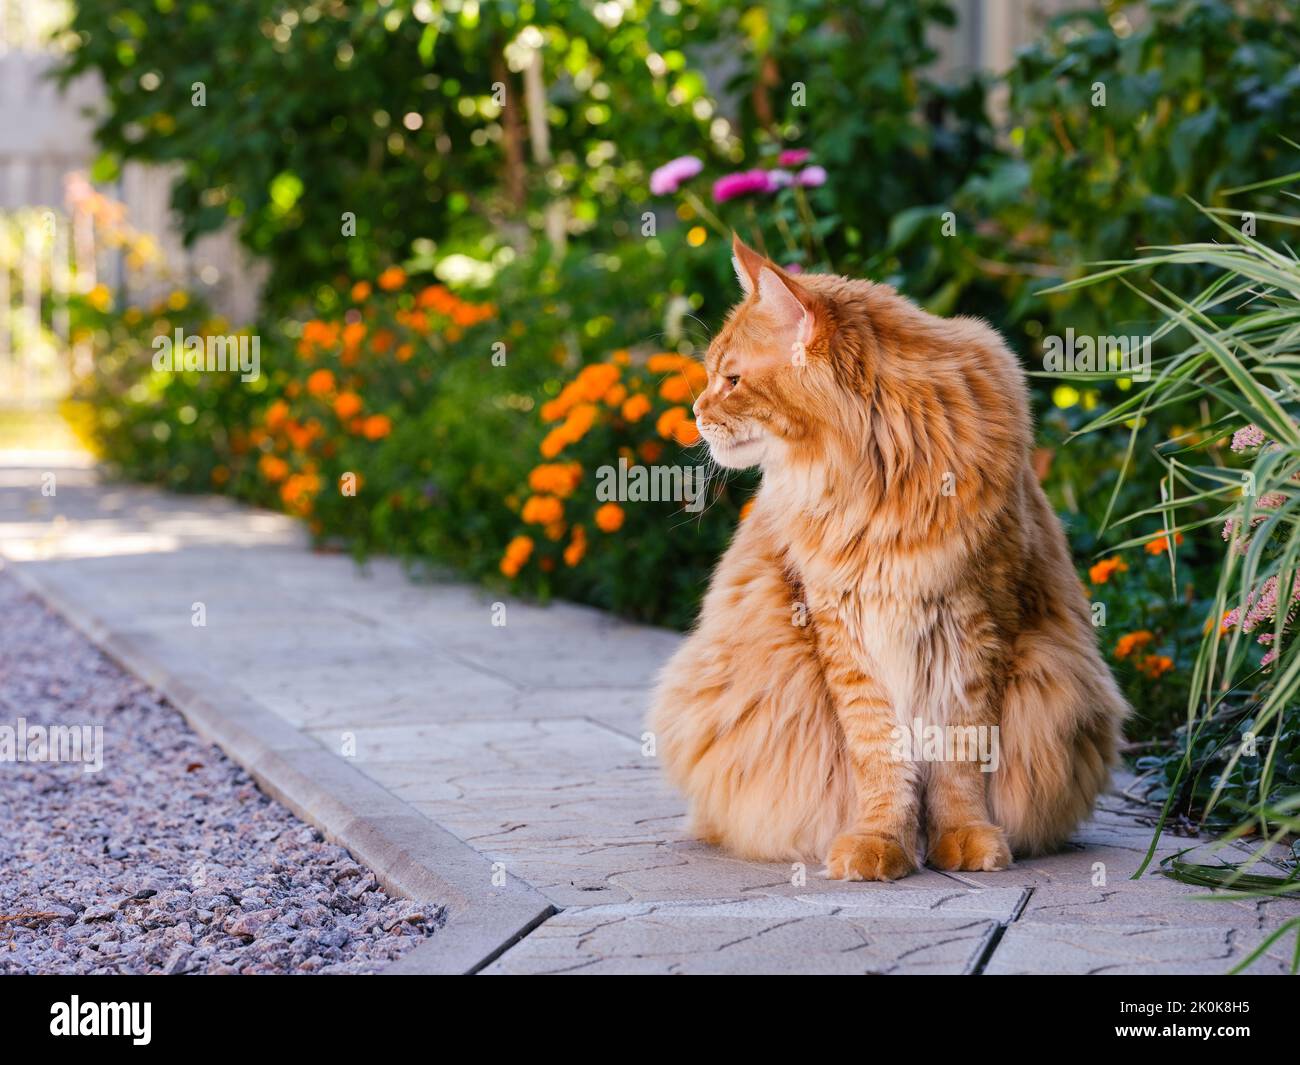 A ginger Maine Coon cat sitting on the path in the garden. Stock Photo